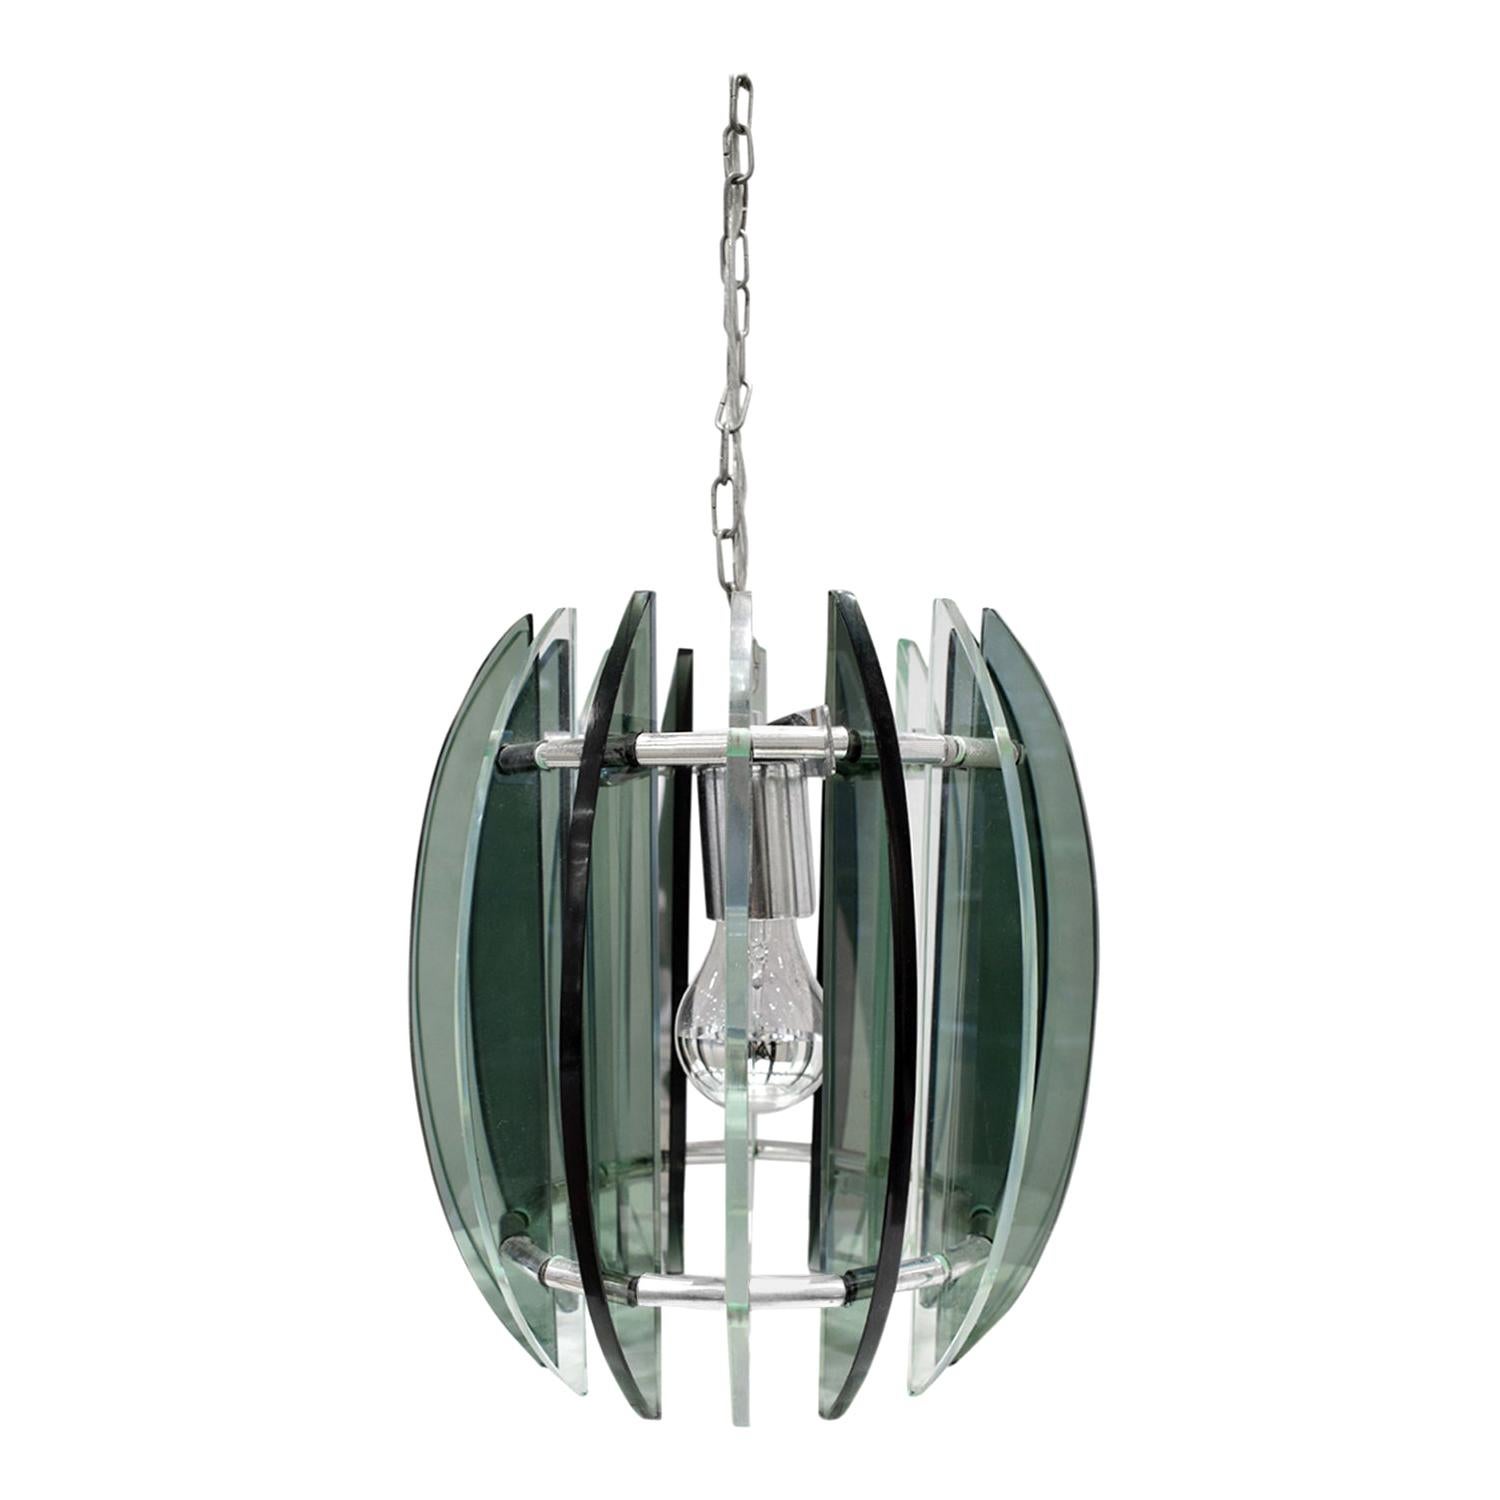 Chandelier in Chrome and Glass in the Style of Fontana Arte, 1970s For Sale